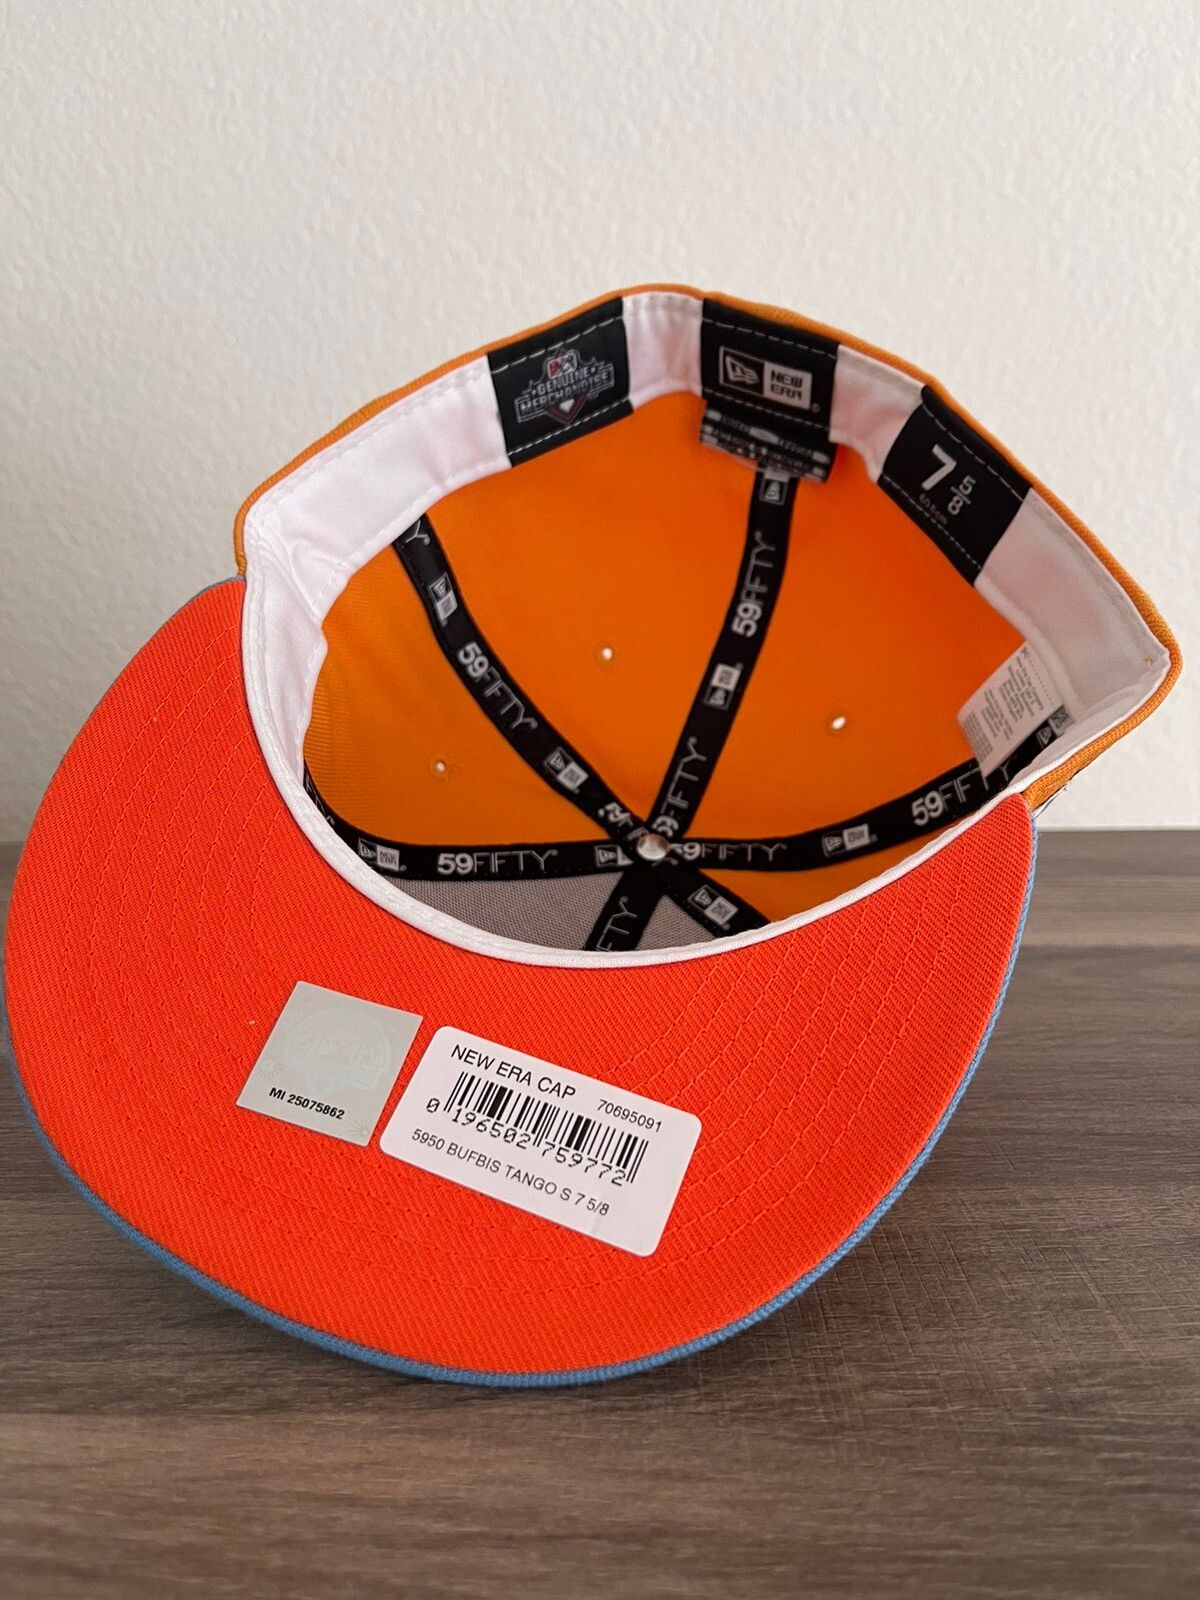 New Era Topperz Buffalo Bisons Iced Orange Edition - Size 7 5/8 Size ONE SIZE - 4 Preview